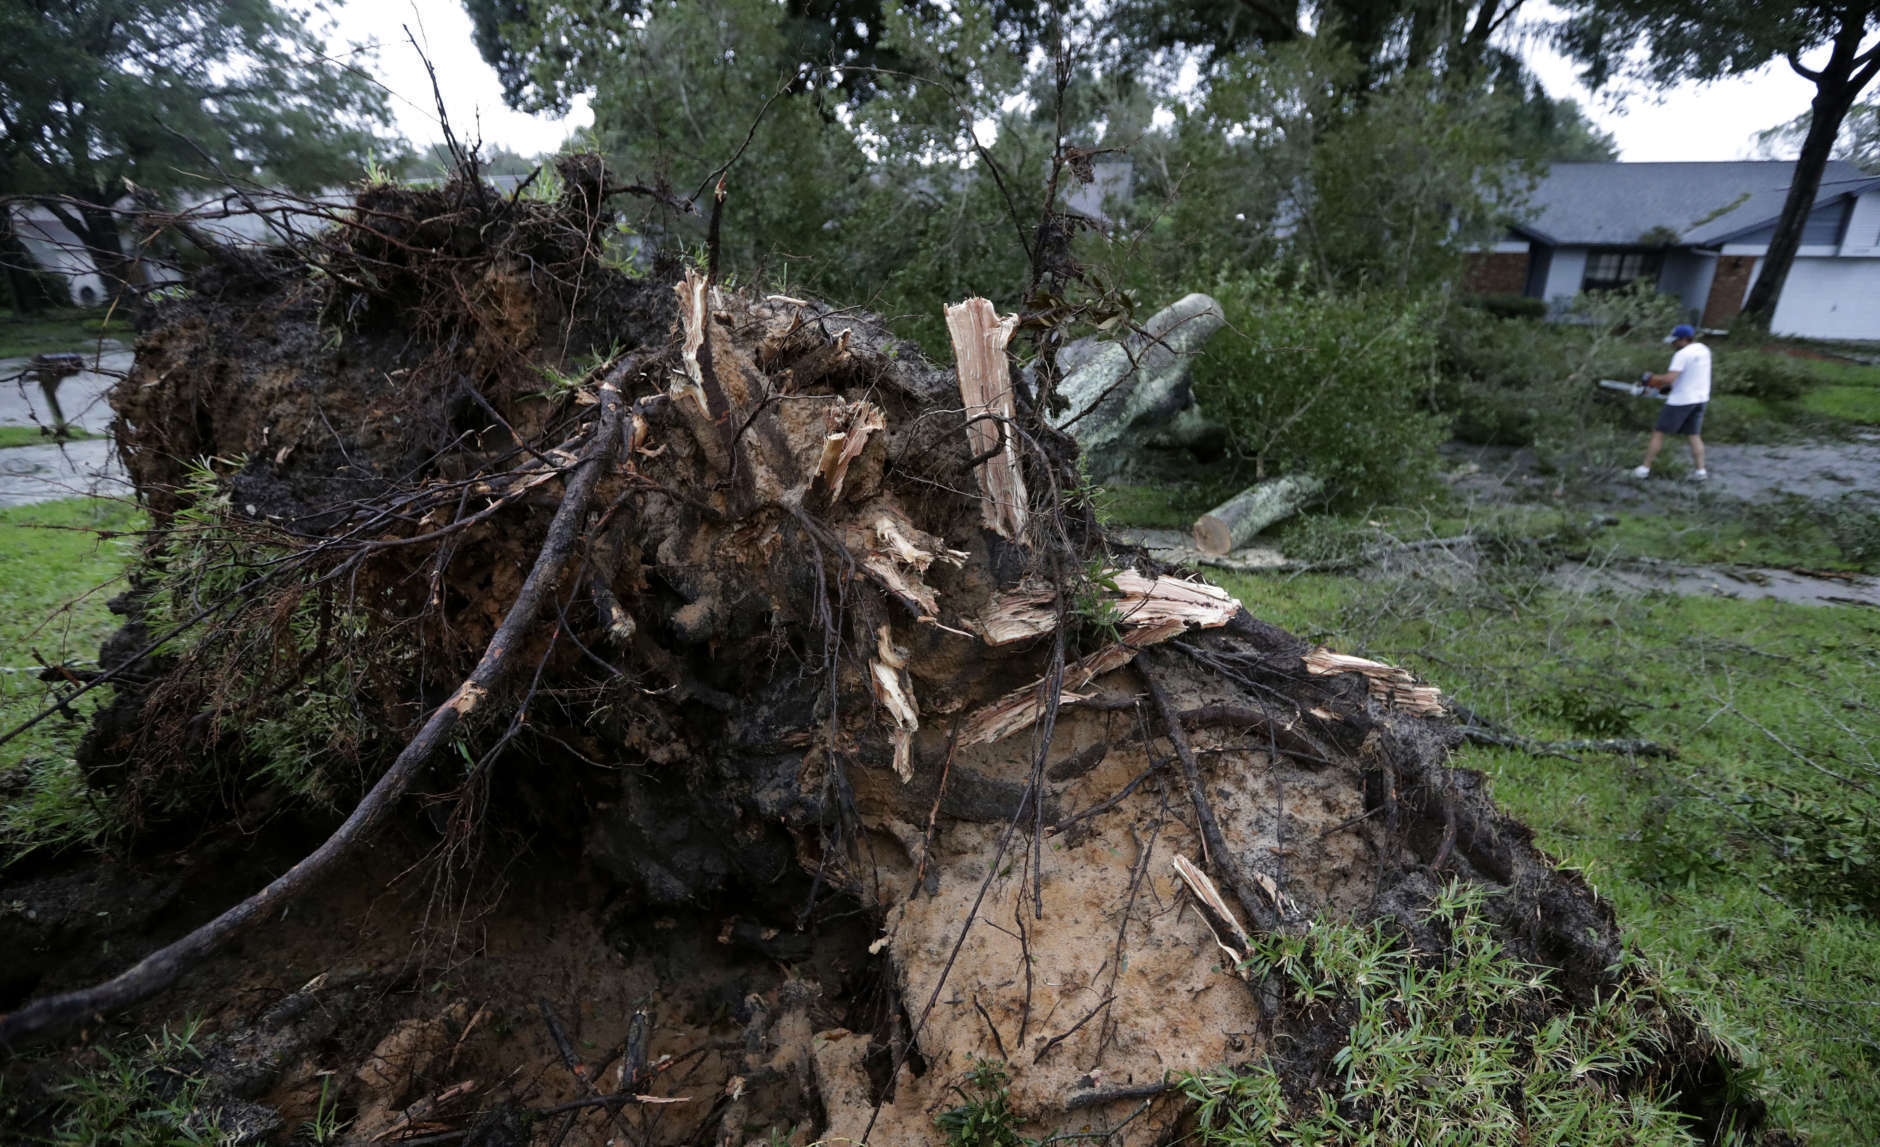 Brian Baker, of Valrico, Fla., cuts an Oak tree in the aftermath of Hurricane Irma on Monday, Sept. 11, 2017, in Valrico, Fla. (AP Photo/Chris O'Meara)